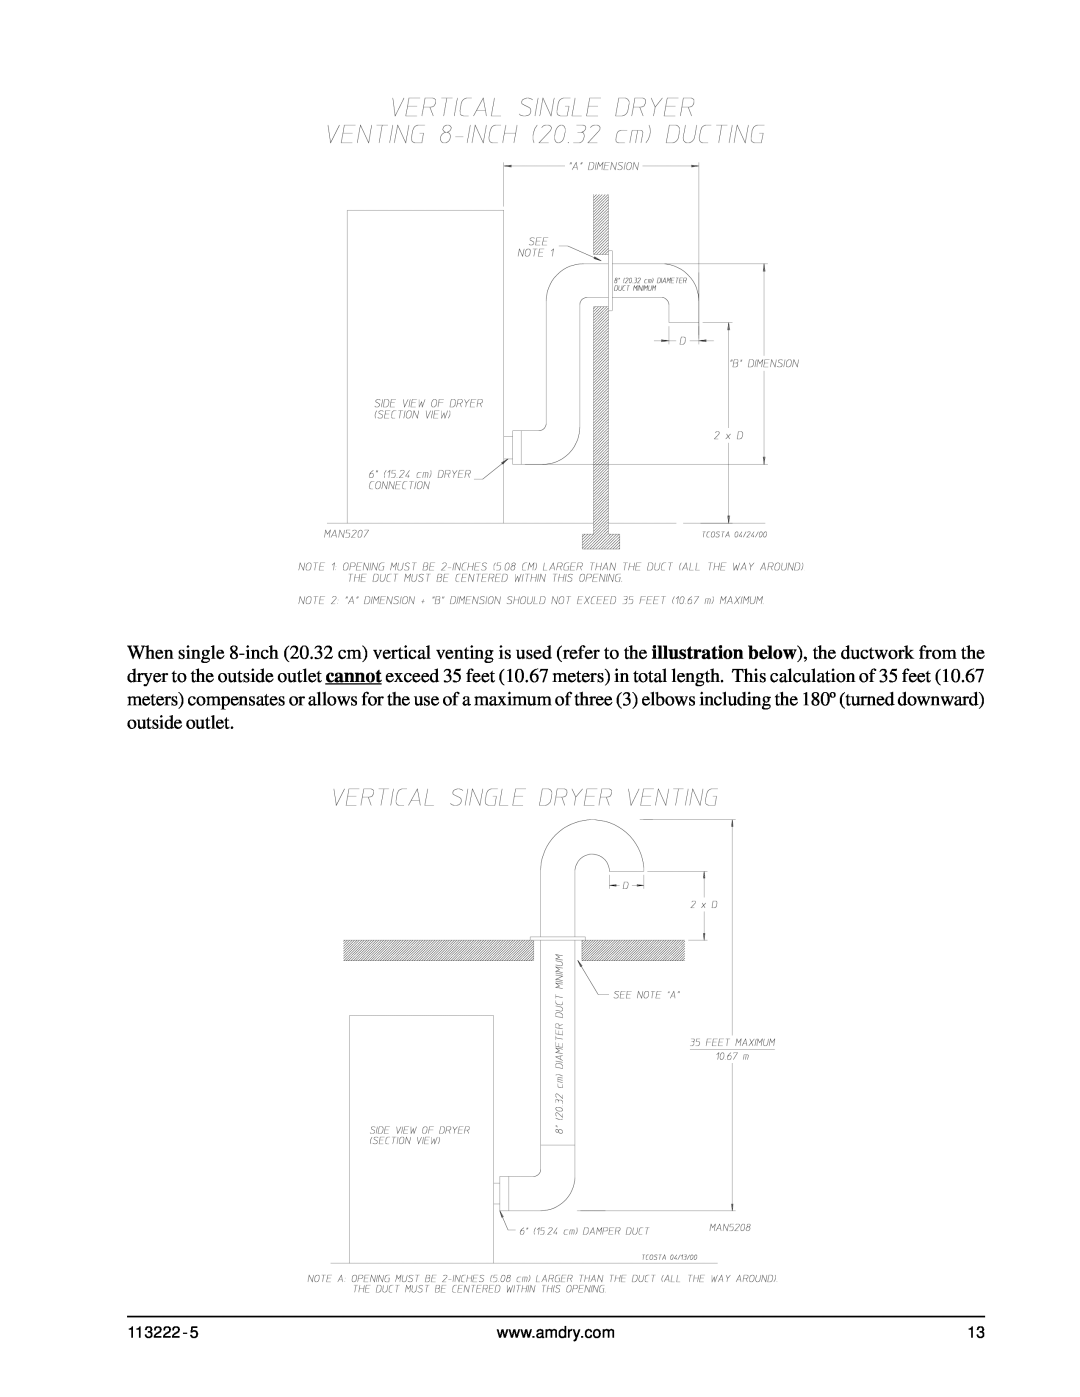 American Dryer Corp AD-24 Phase 7 installation manual 